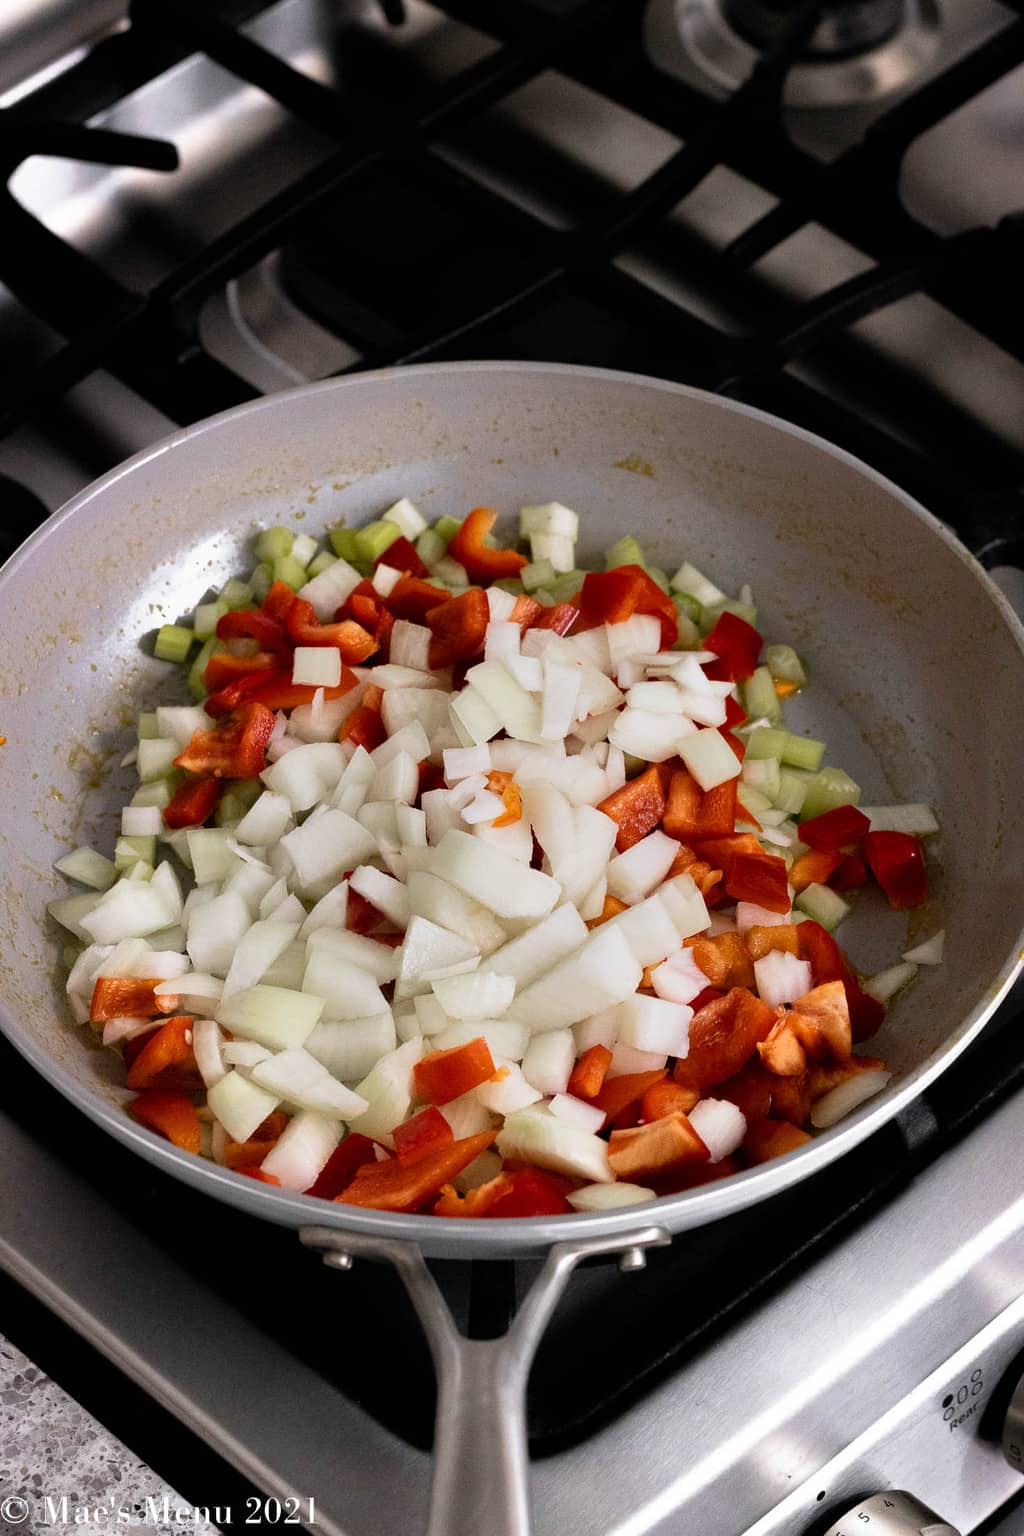 An angled shot of a saute skillet of celery, peppers, and onions.